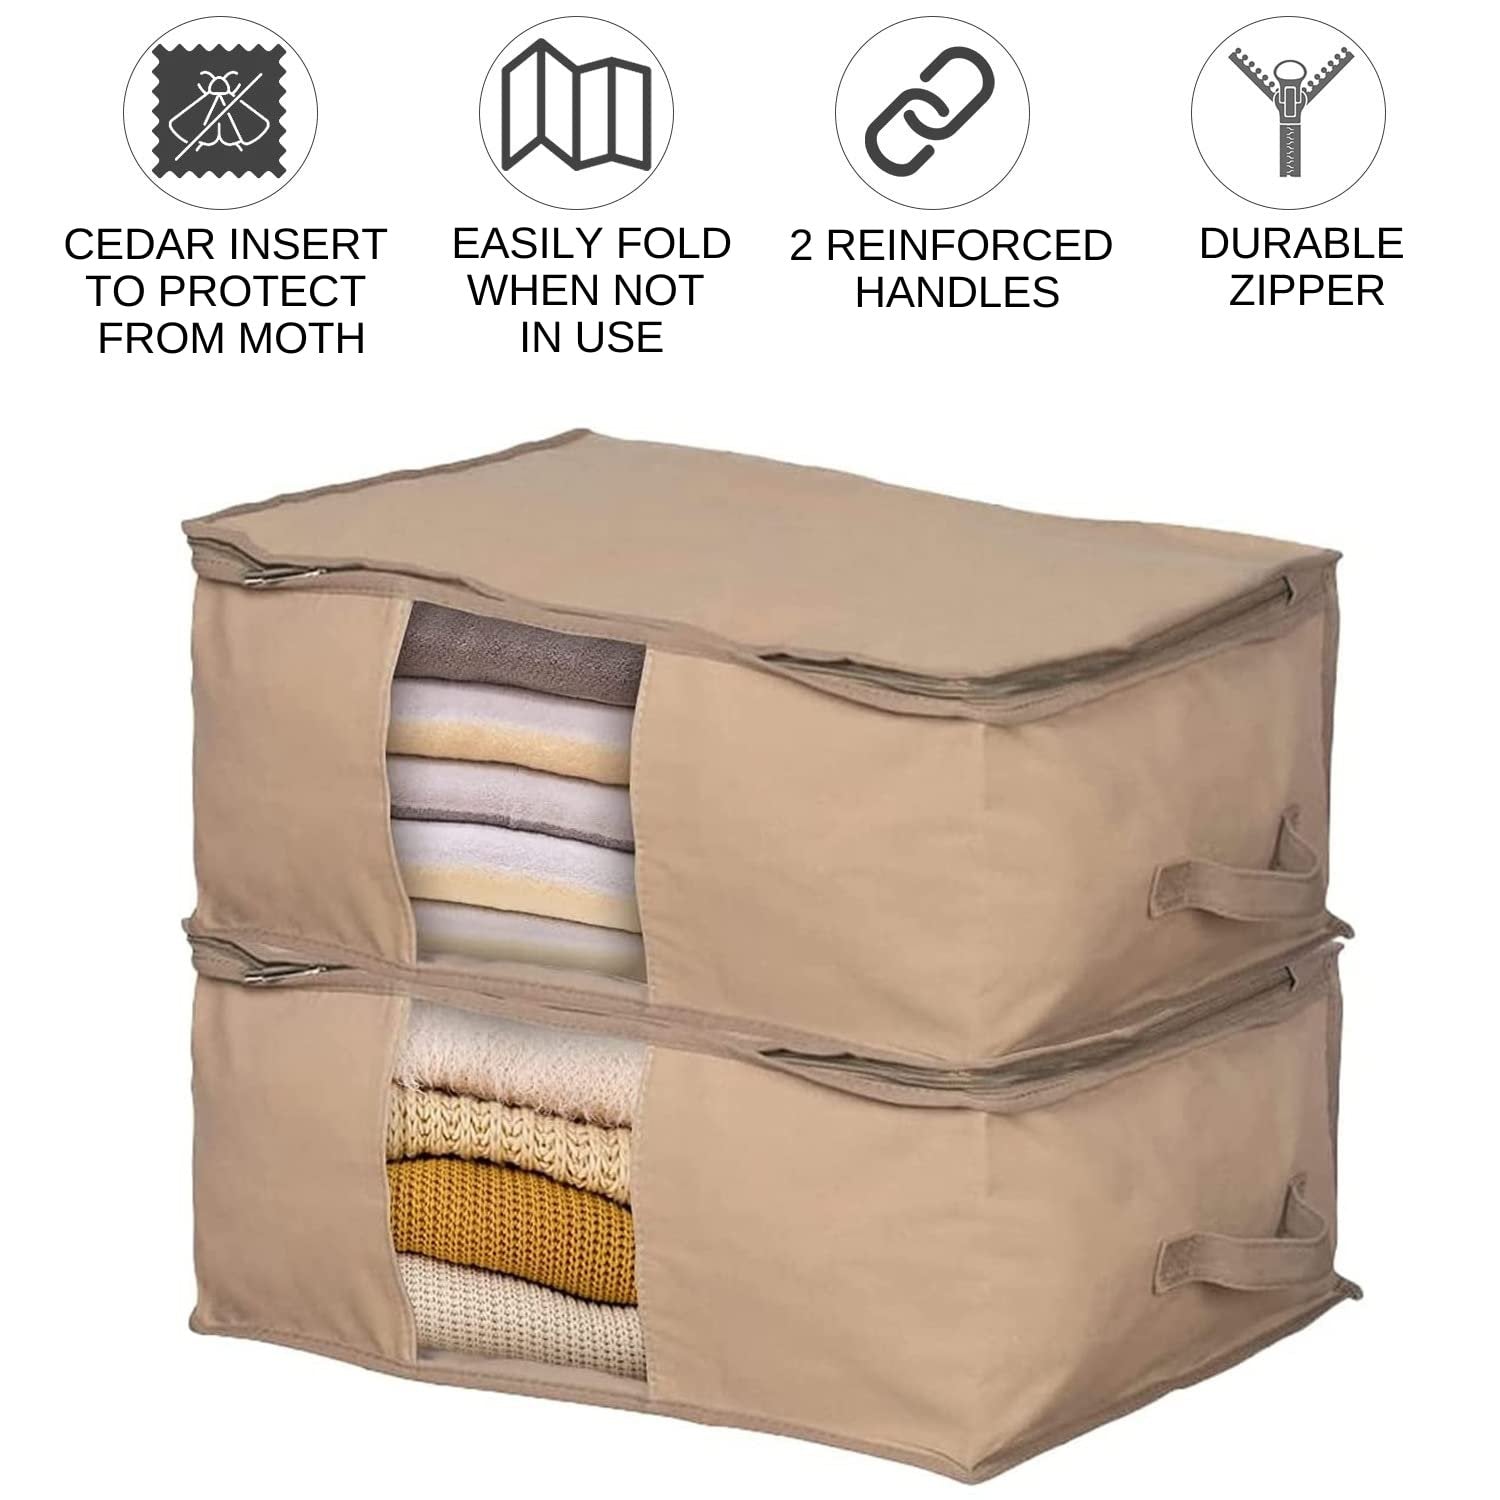 HOLDN' STORAGE Clothes Storage Bag Organizer - Set of 2 Beige Bags (18x14x8) with Cedar Insert for Moth Protection